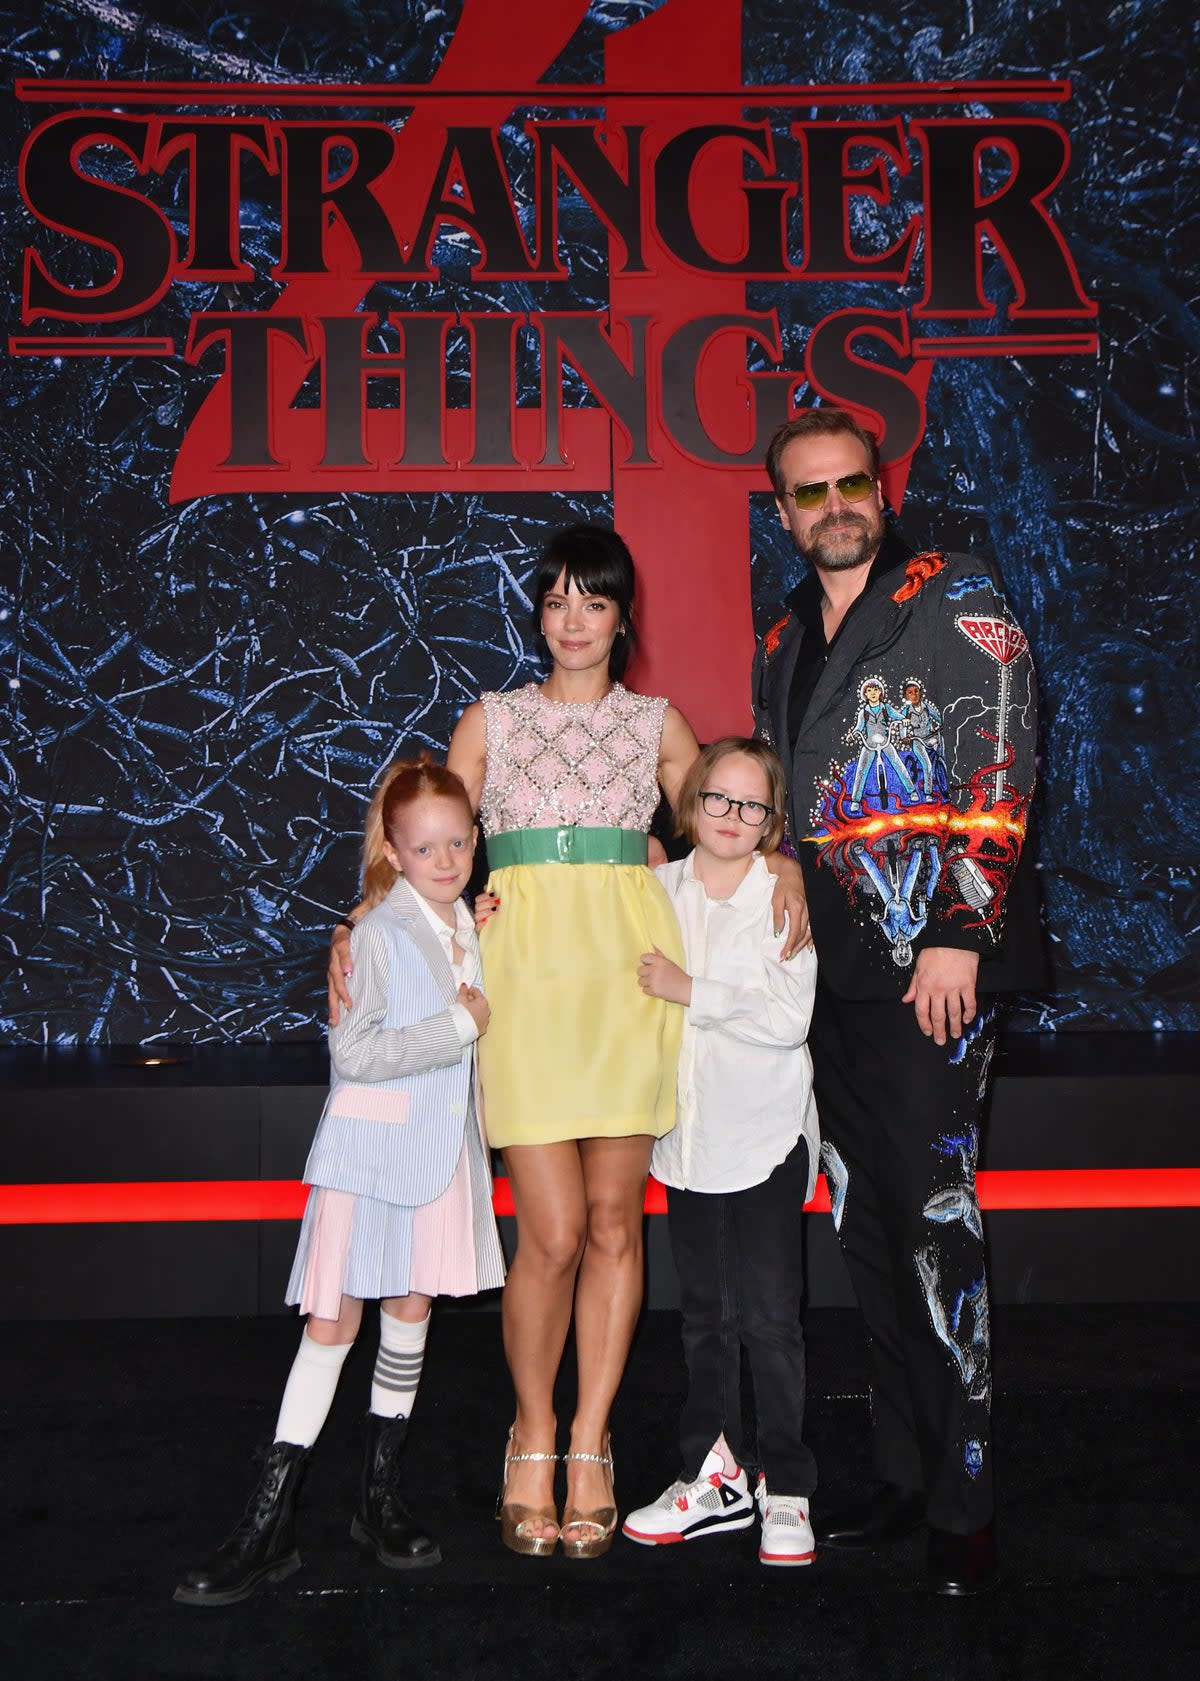 Lily Allen with her husband David Harbour and daughters Marnie Rose Cooper and Ethel Cooper at the ‘Stranger Things’ season four premiere in New York City on 14 May 2022 (AFP via Getty Images)